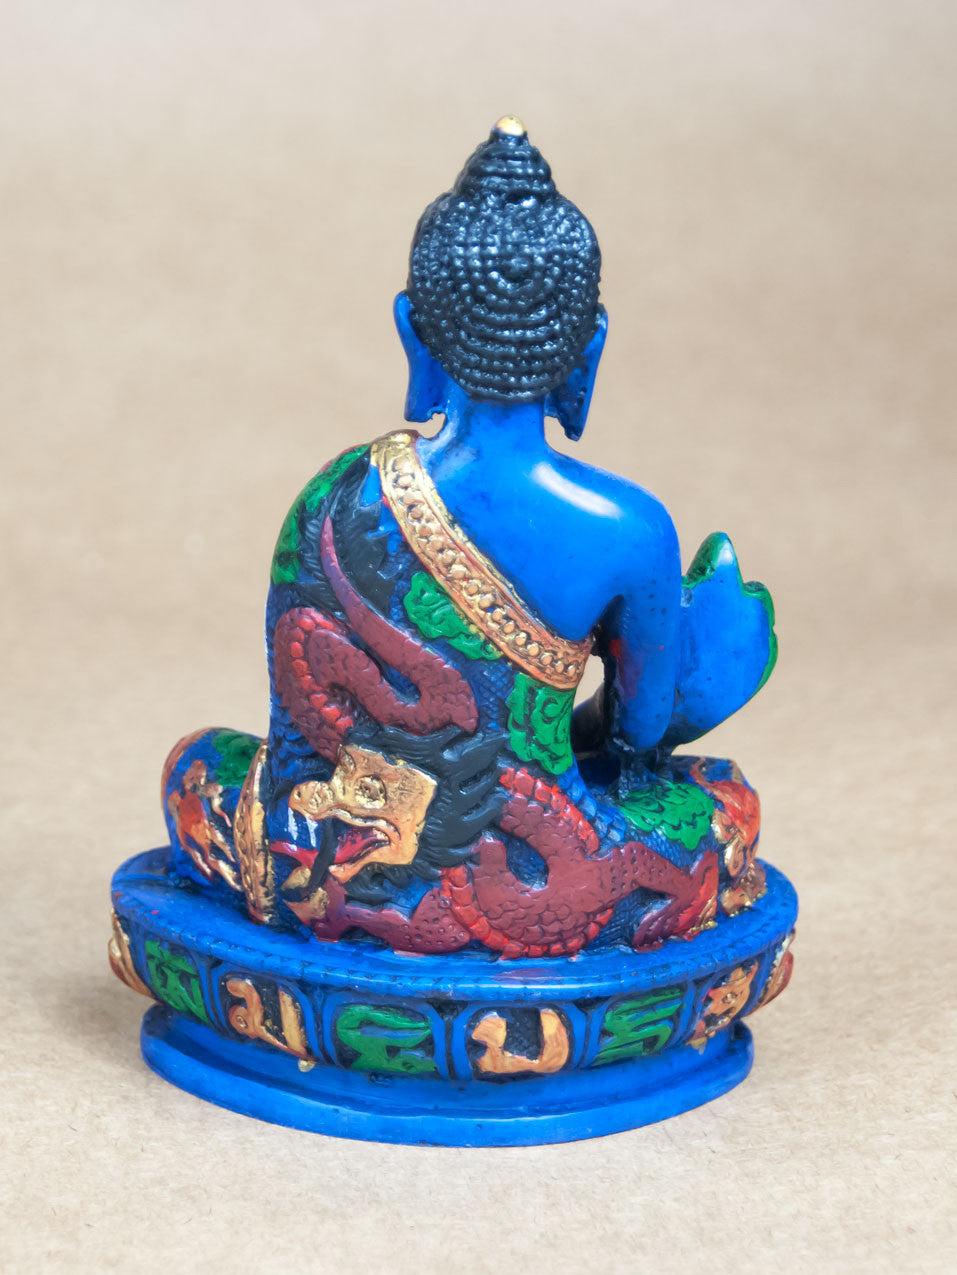 Buy sn handicrafts Sitting Buddha Idol Statue ShowpieceIdols Statue Gift  Item Showpiece Living Room Home Décor and Gifts Online at Low Prices in  India - Amazon.in